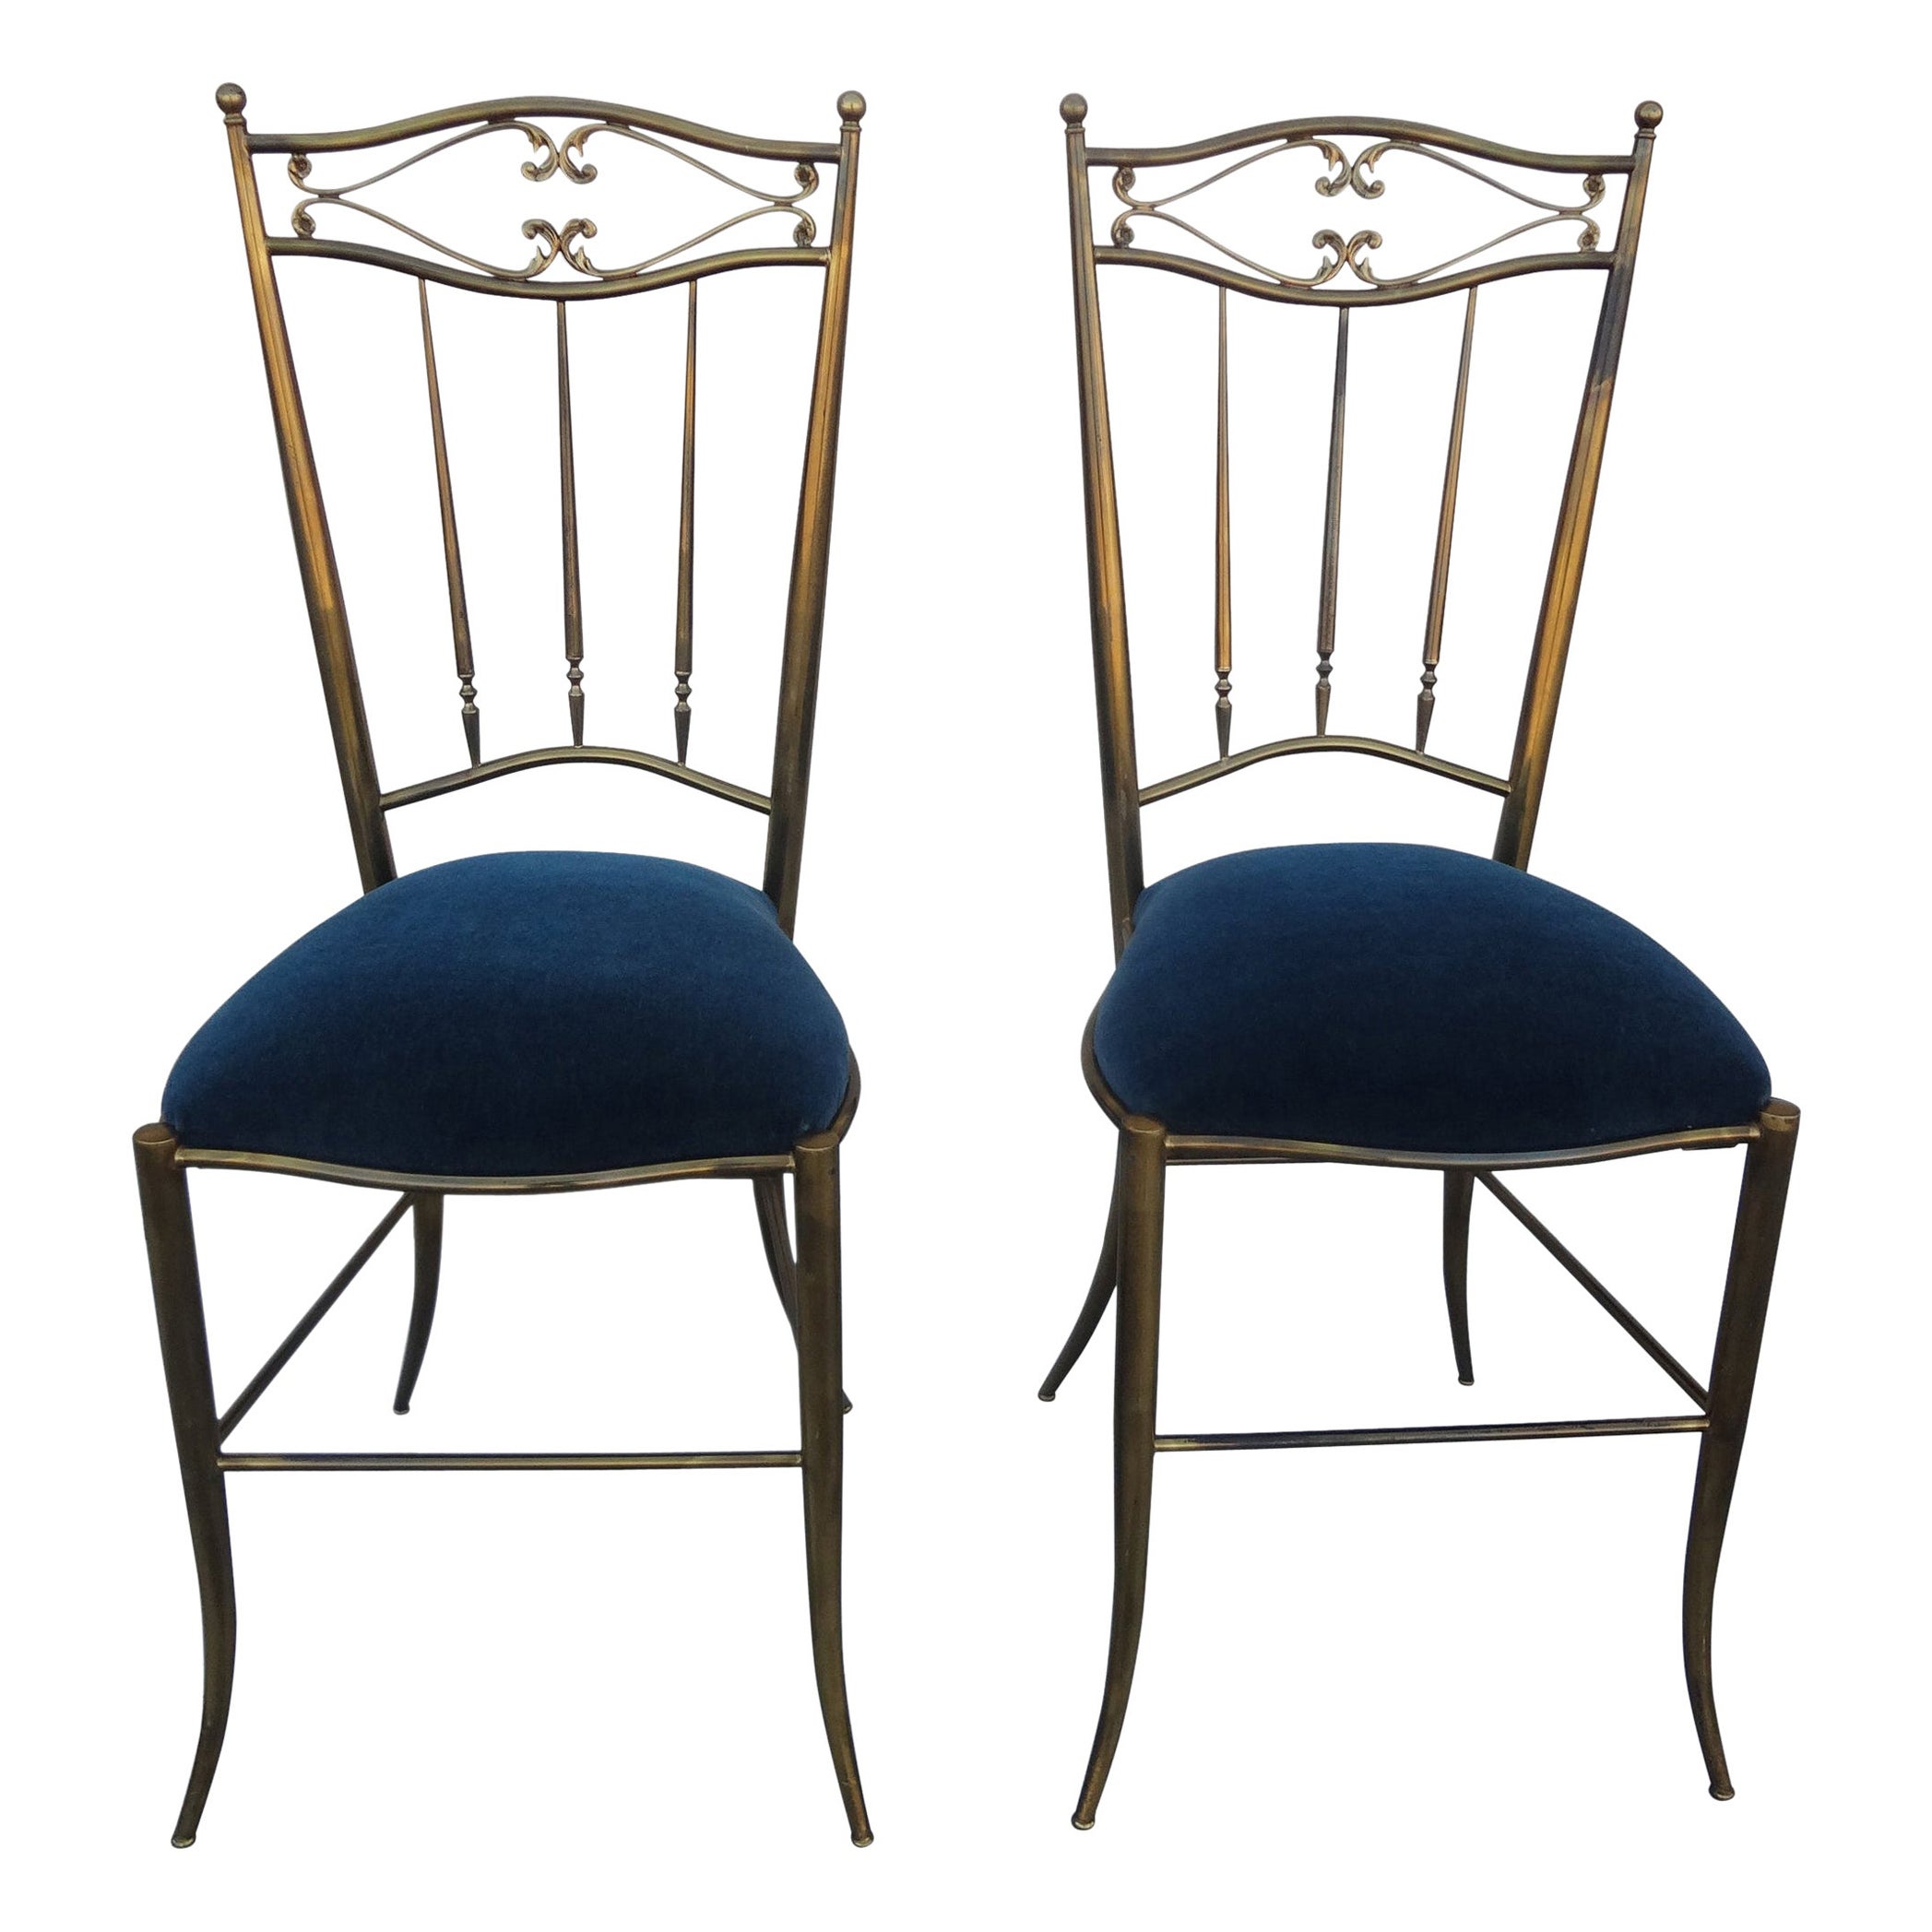 Vintage Pair of Italian Neoclassical Style Brass Chiavari Side Chairs